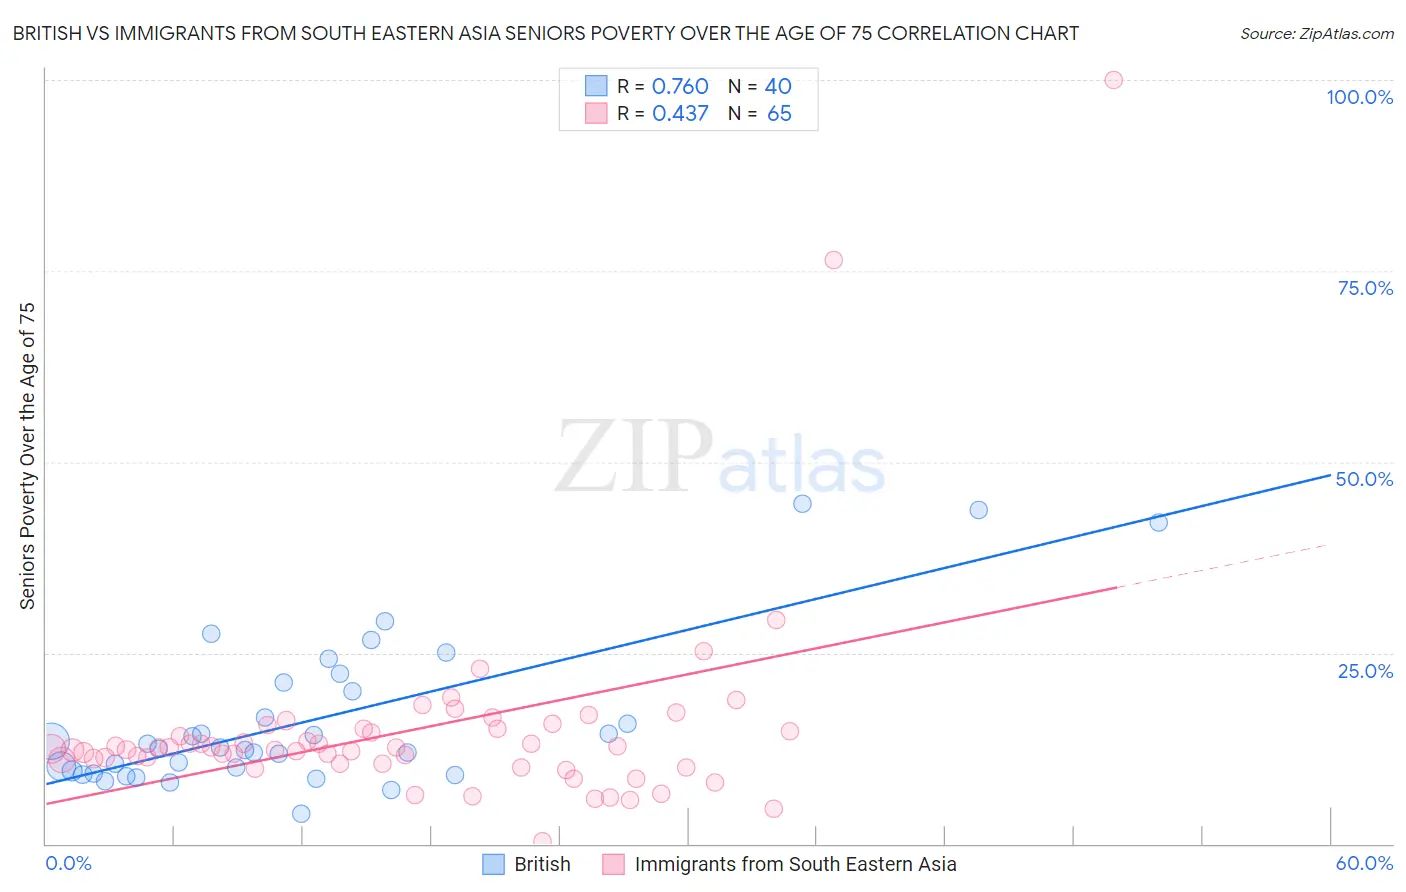 British vs Immigrants from South Eastern Asia Seniors Poverty Over the Age of 75